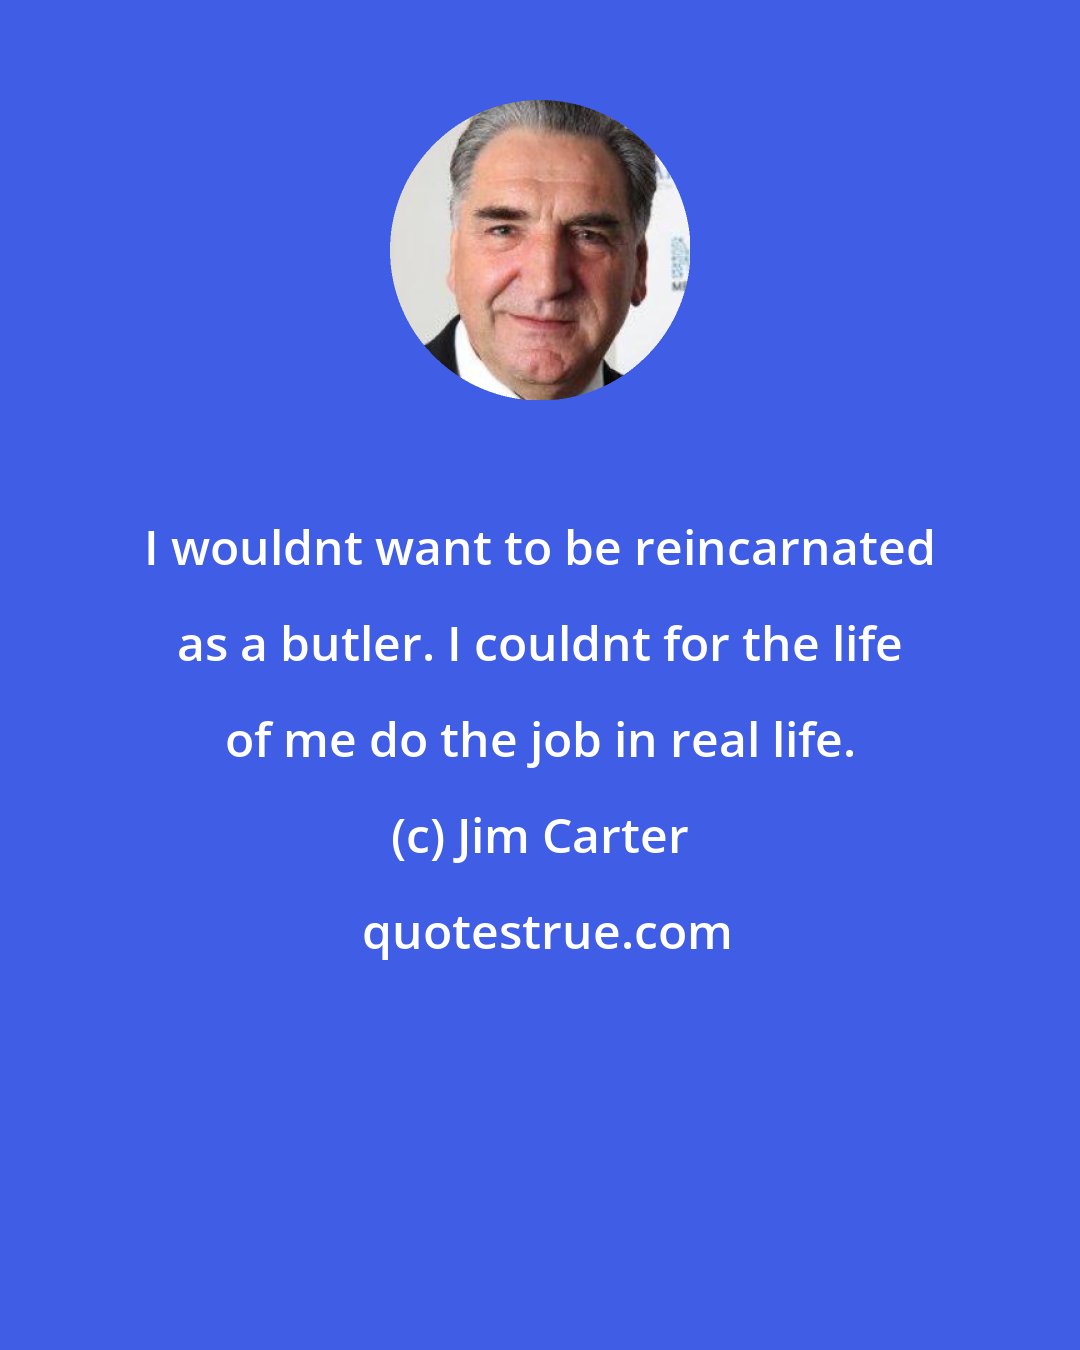 Jim Carter: I wouldnt want to be reincarnated as a butler. I couldnt for the life of me do the job in real life.